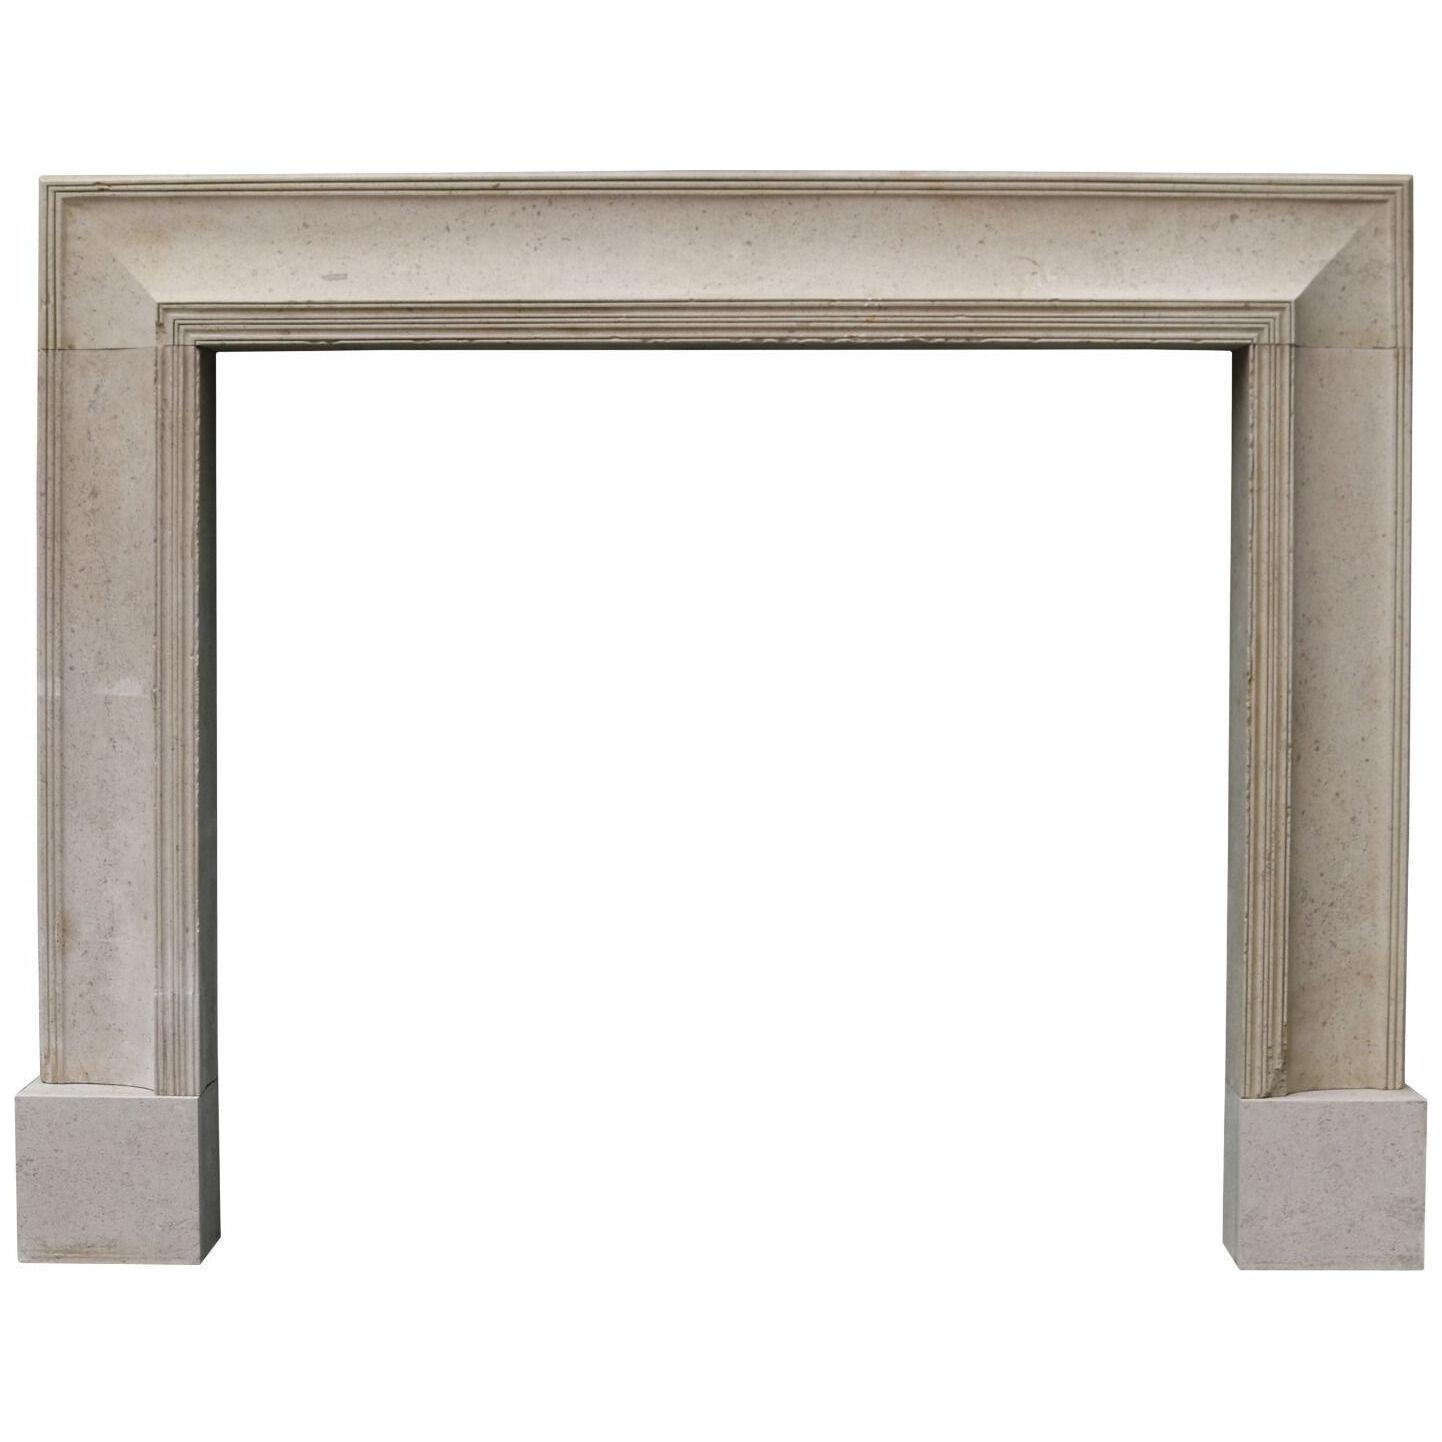 1920s Bolection Fireplace in Fossilised Limestone